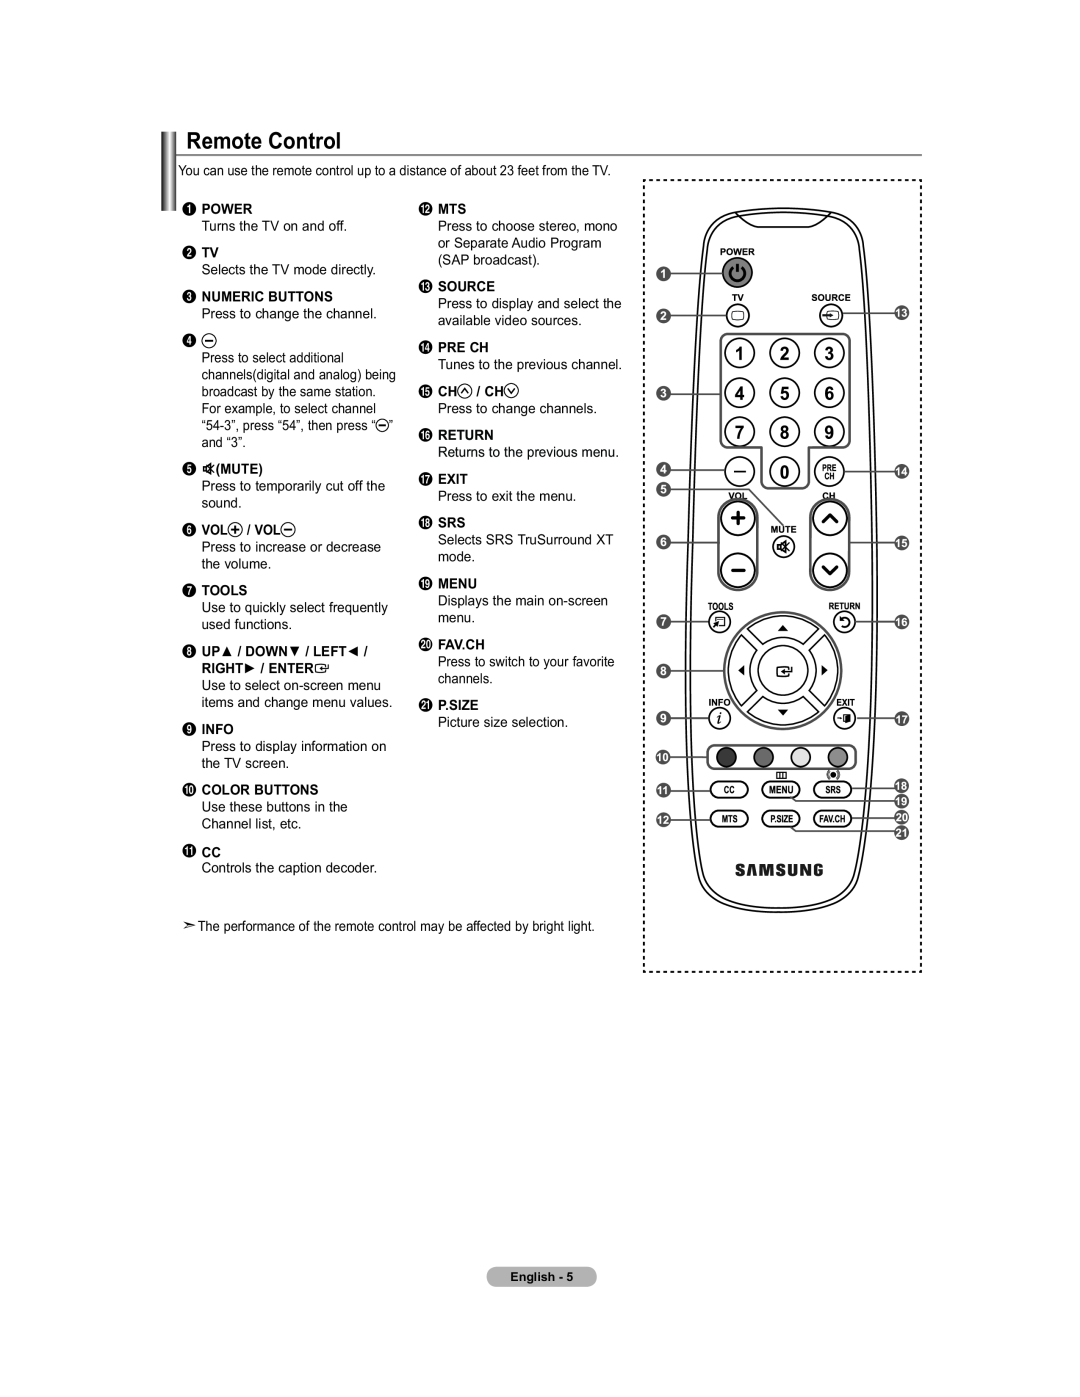 Samsung 451 Power, 2 TV, NUMERIC BUTTONS Press to change the channel, Mute, Vol / Vol, Tools, 8 UP, Right, Enter, Info 